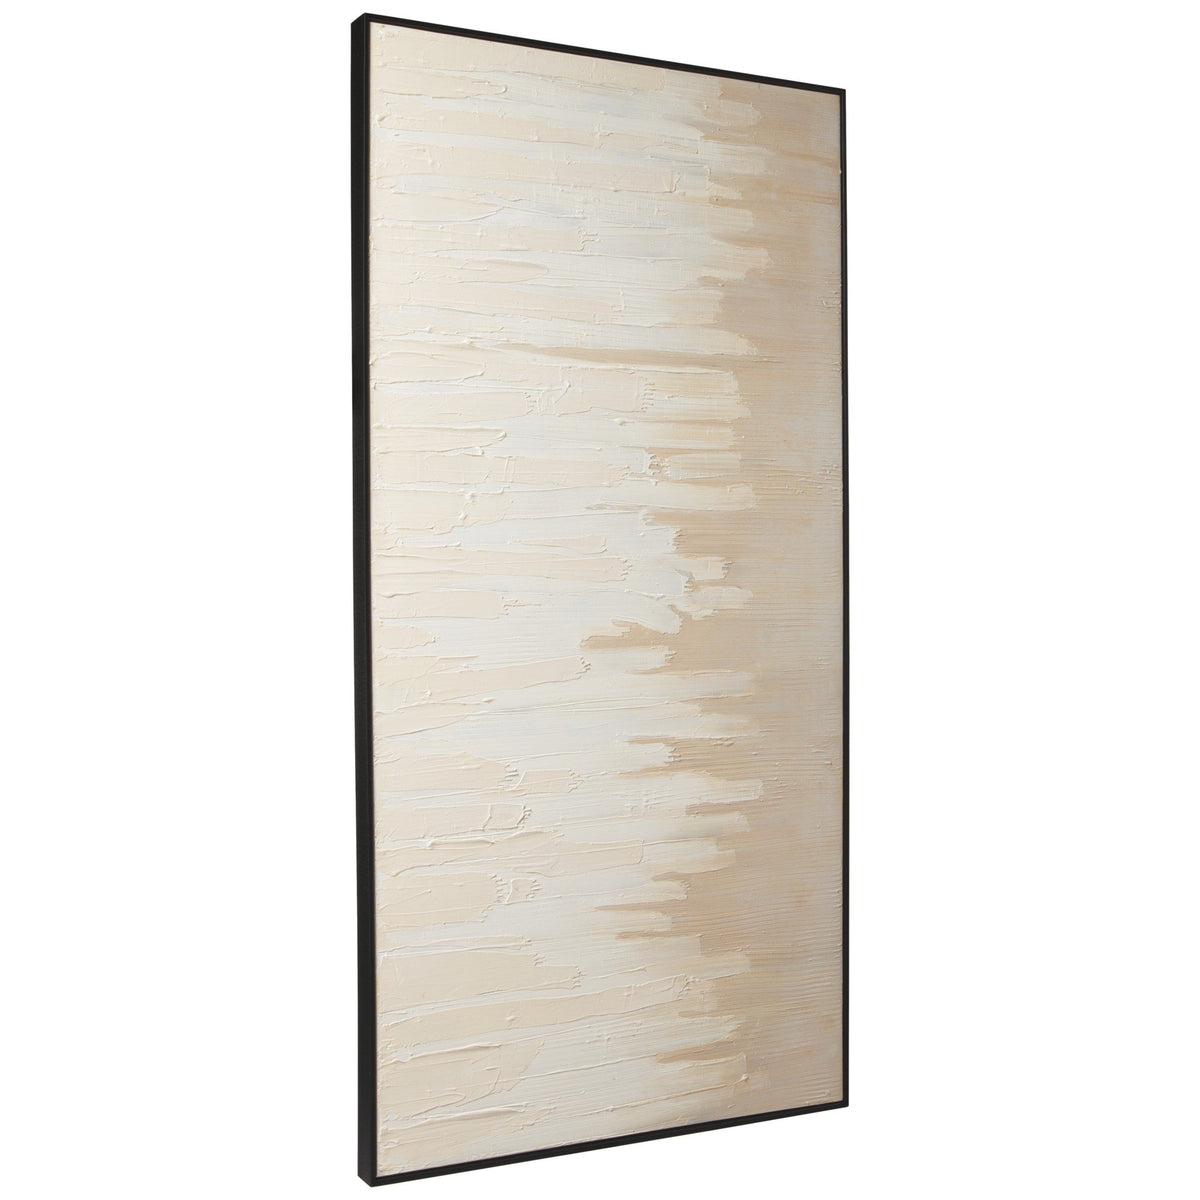 Rectangular Canvas Wall Art with Abstract Design, Beige and Off White - BM231394